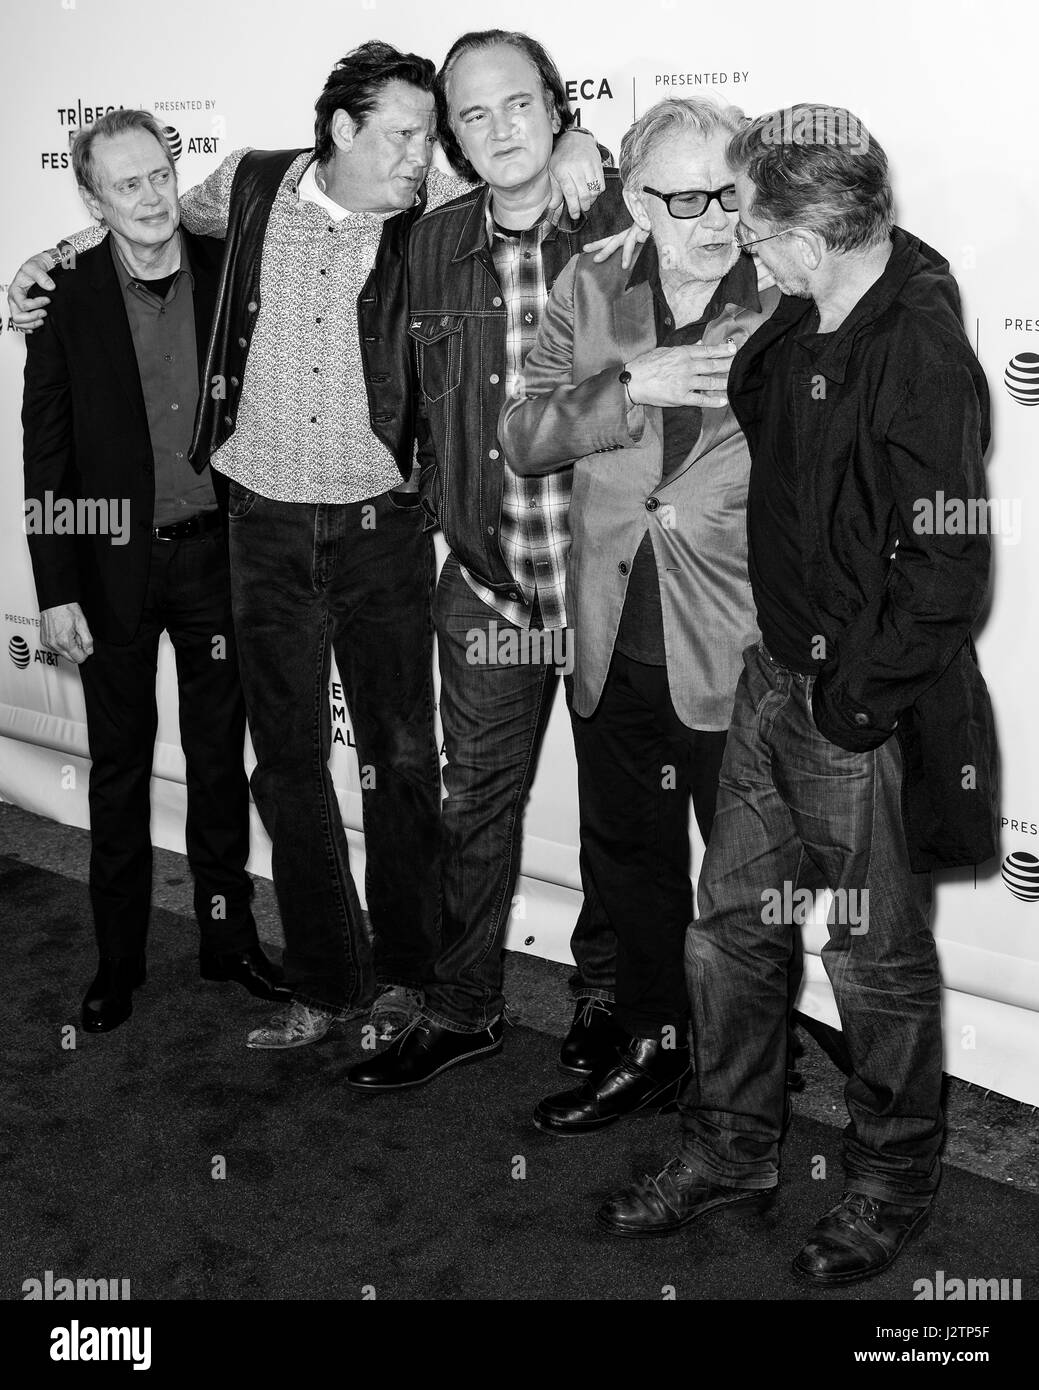 NEW YORK, NY - APRIL 28, 2017: Steve Buscemi, Michael Madsen, Quentin Tarantino, Harvey Keitel and Tim Roth attend the 'Reservoir Dogs' 25th Anniversa Stock Photo